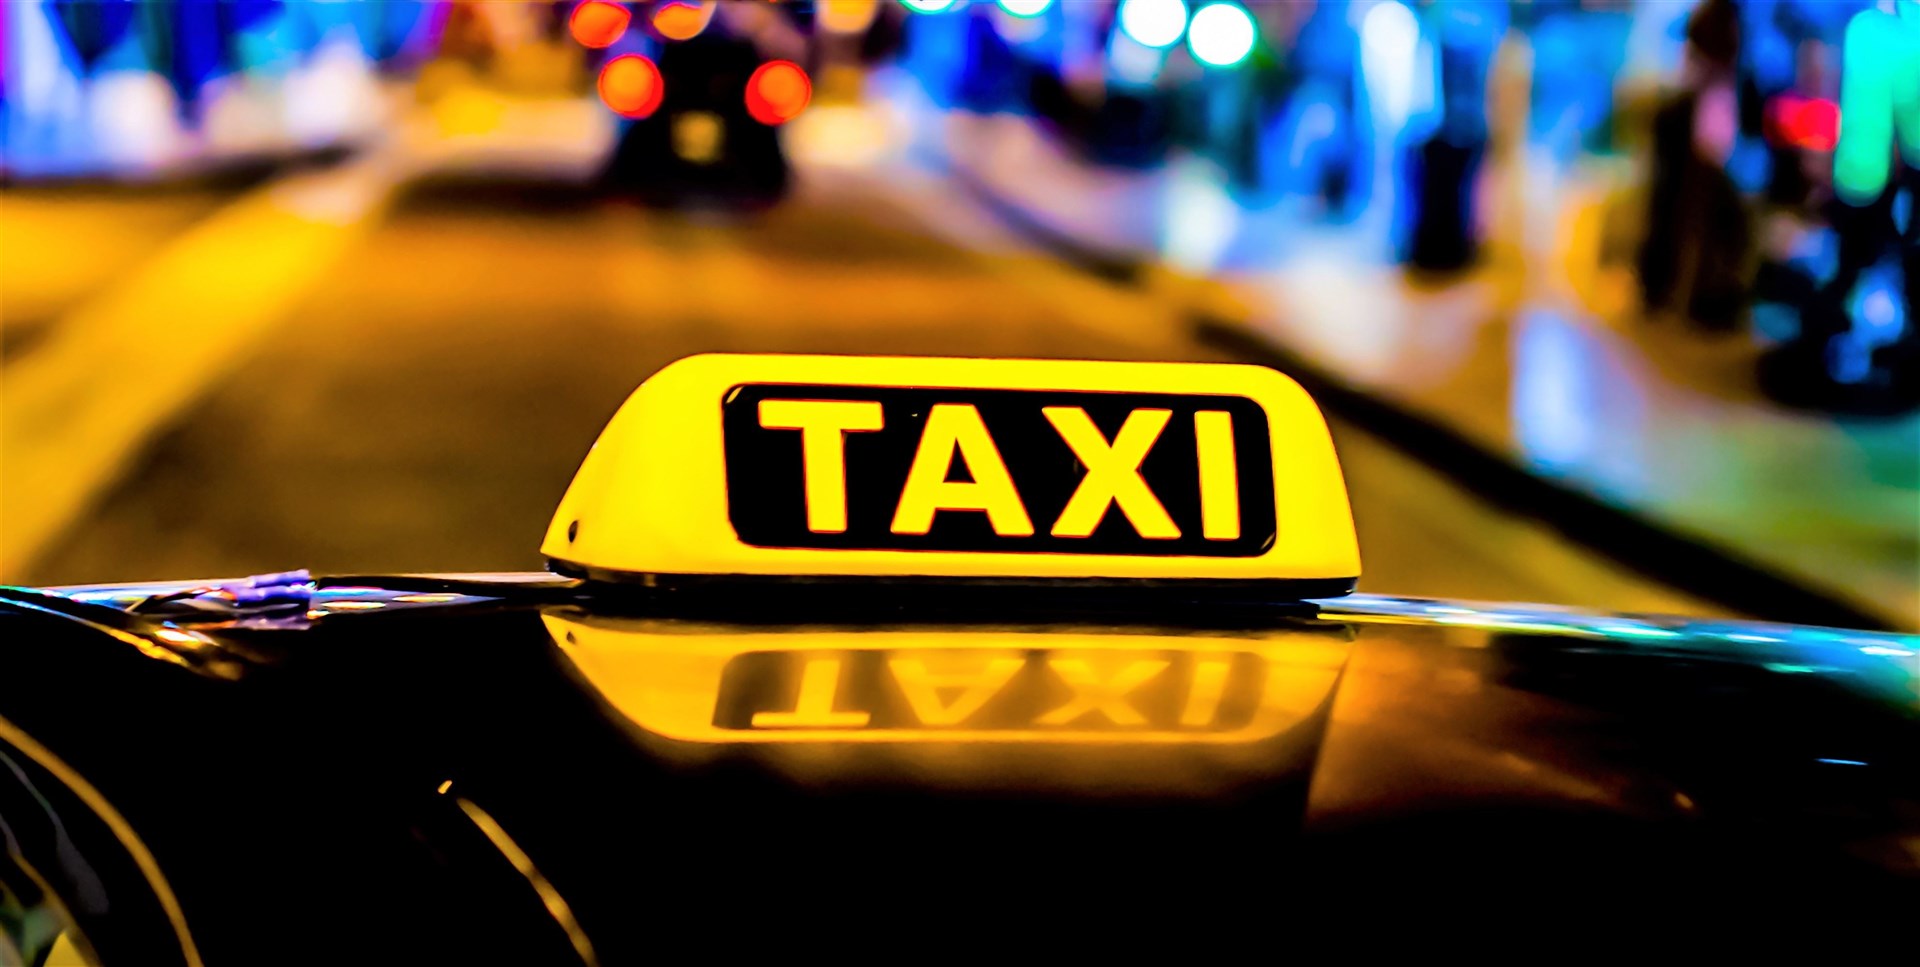 If you are a taxi operator, you may be eligible for a grant of between £1000 - £15,000 depending on the number of vehicle licences you hold.